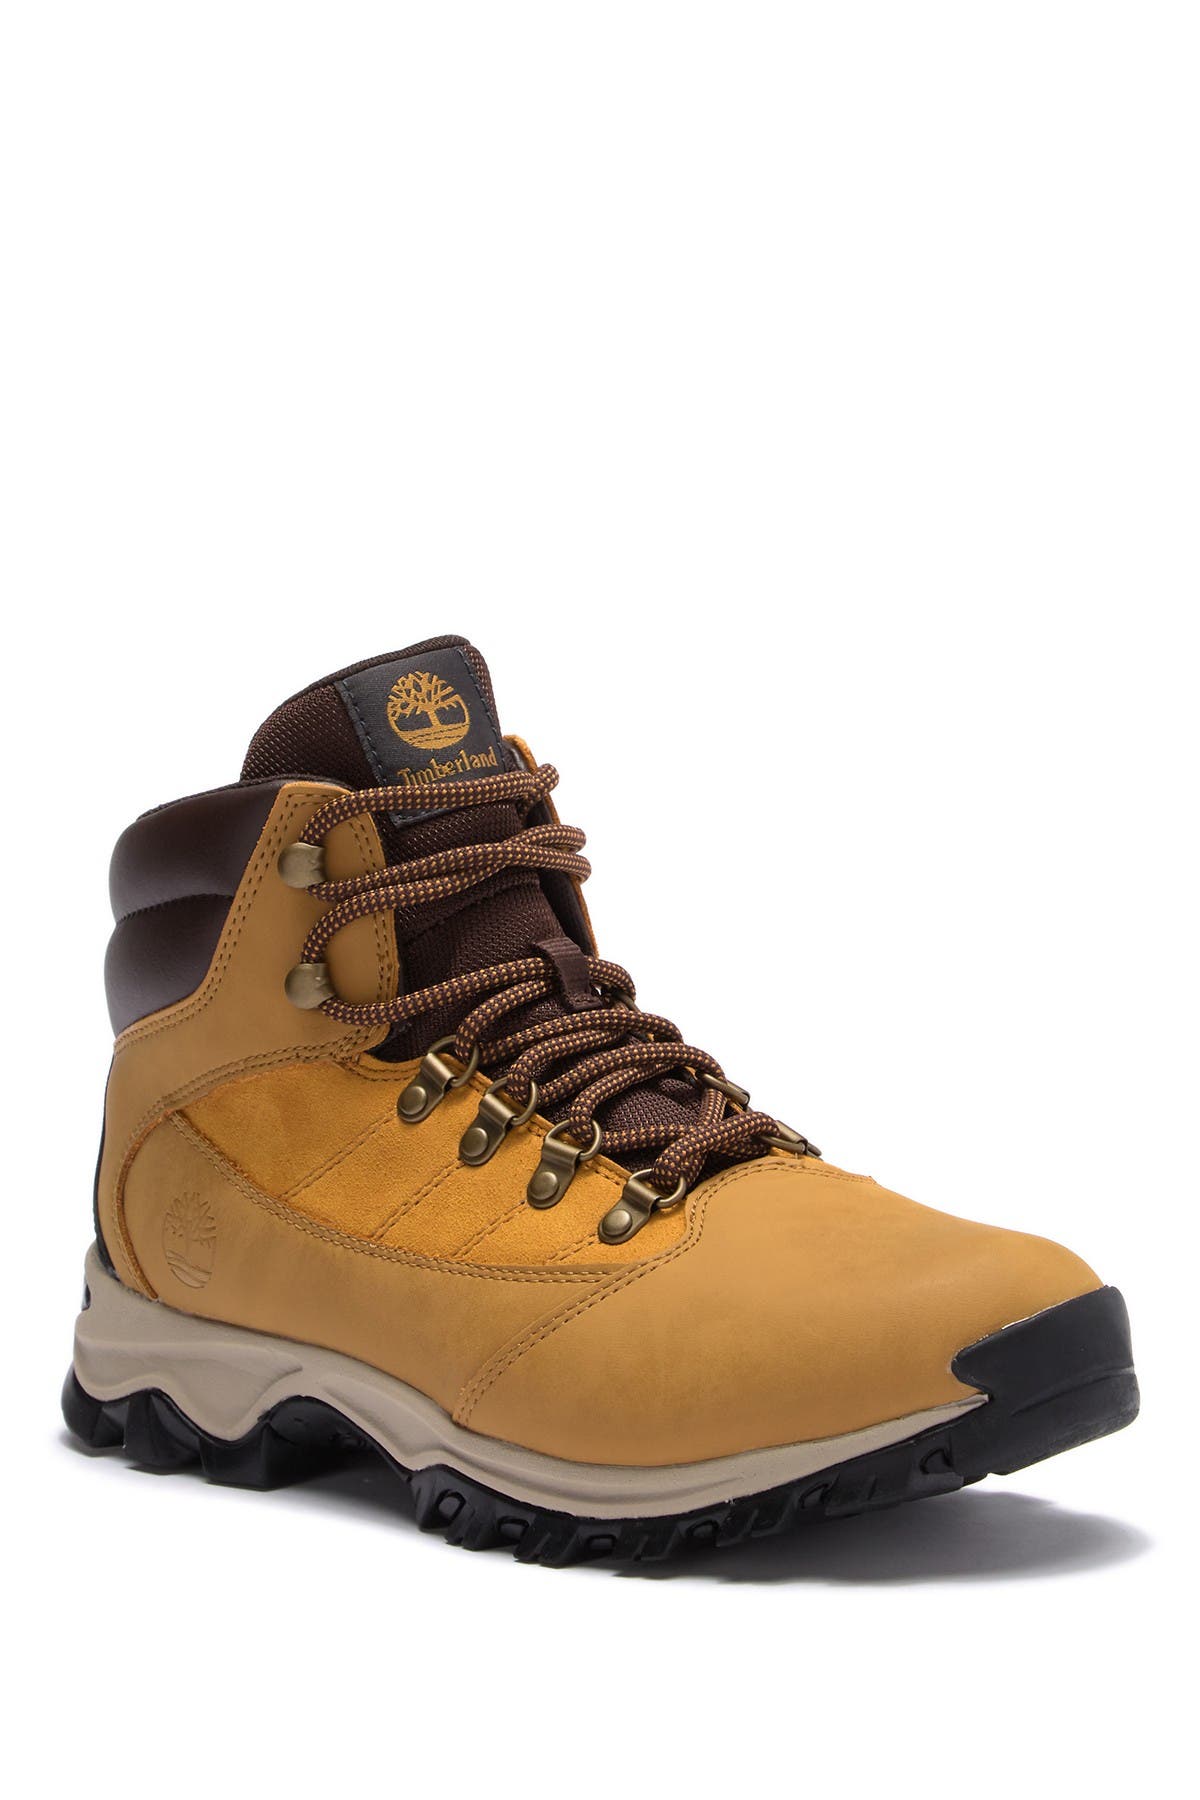 Timberland | Rangeley Leather Boot 